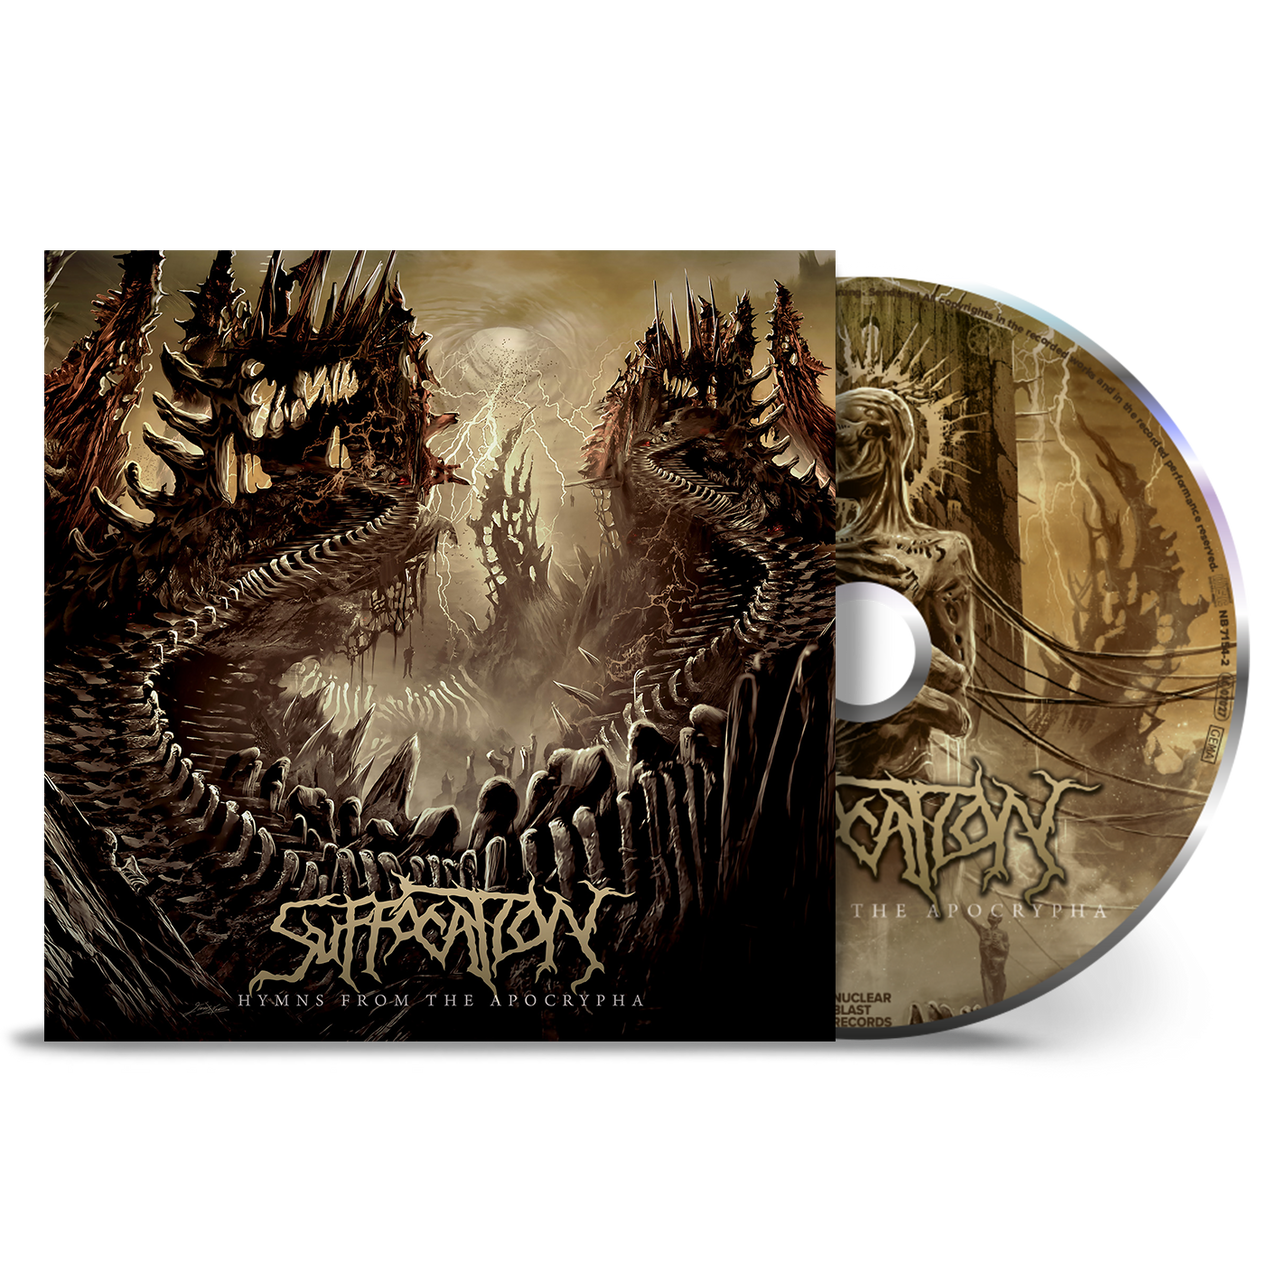 Suffocation - Hymns From The Apocrypha: CD